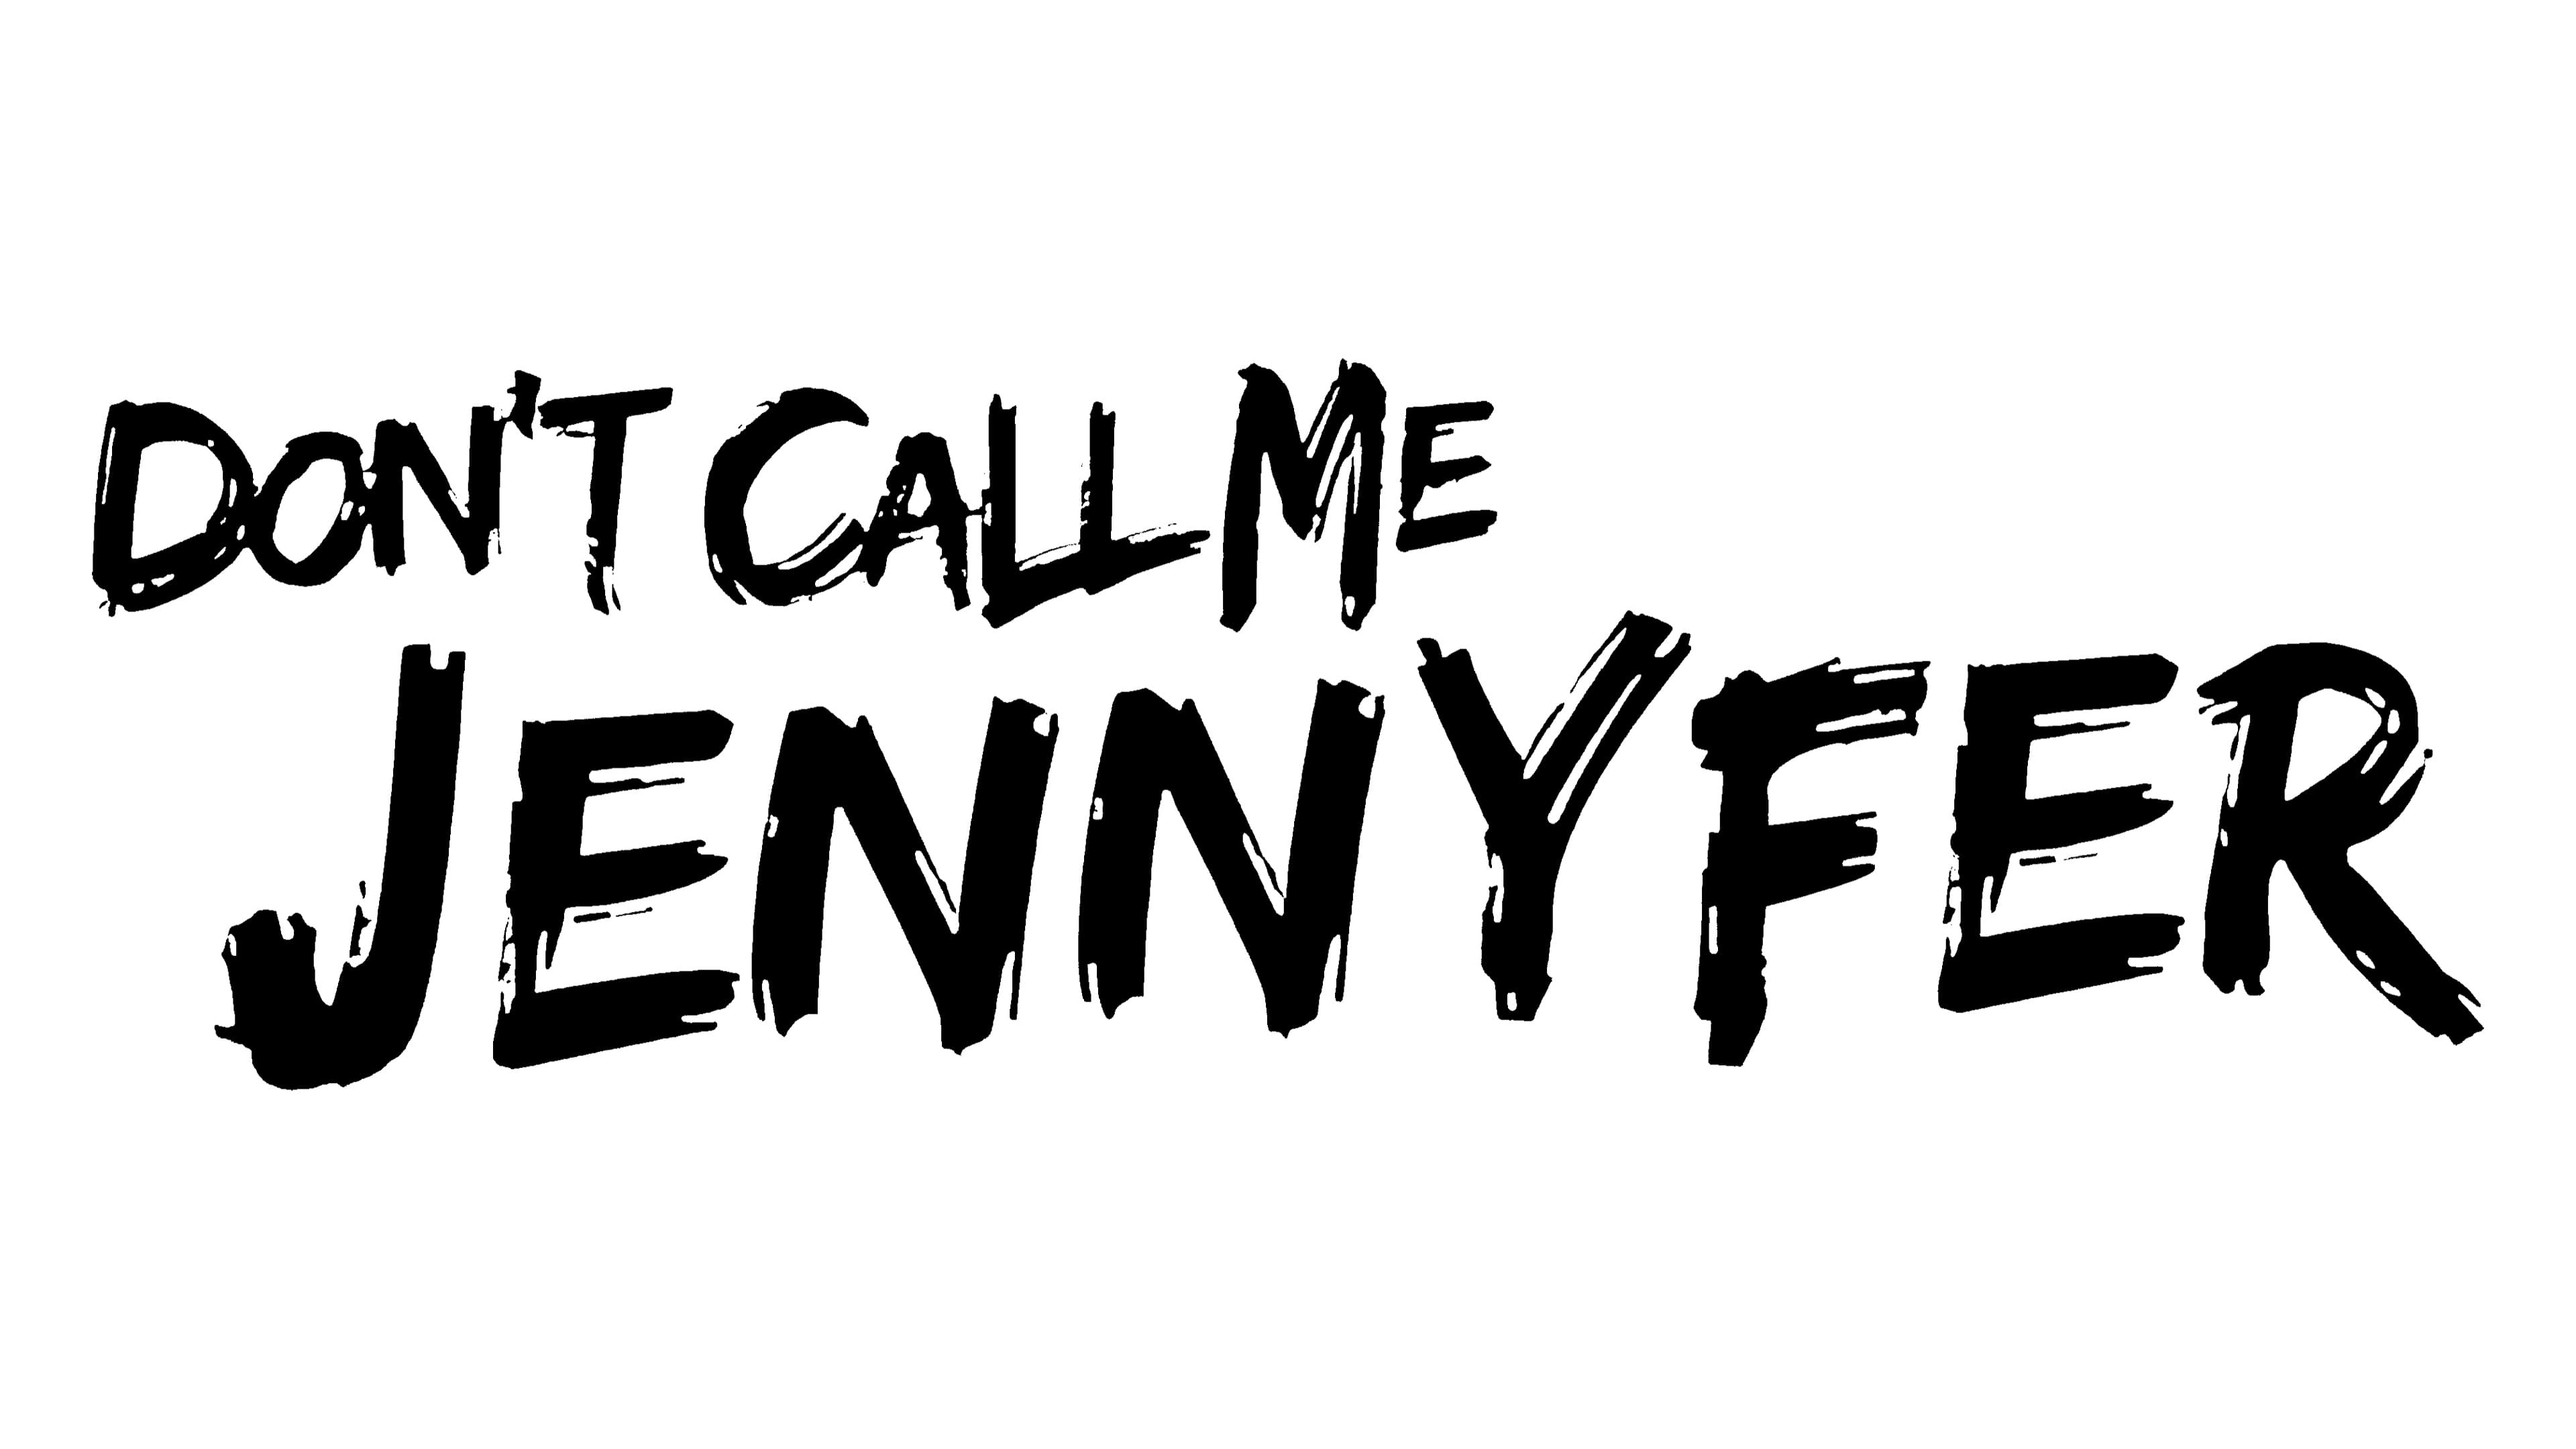 Text: Don't Call Me Jennyfer